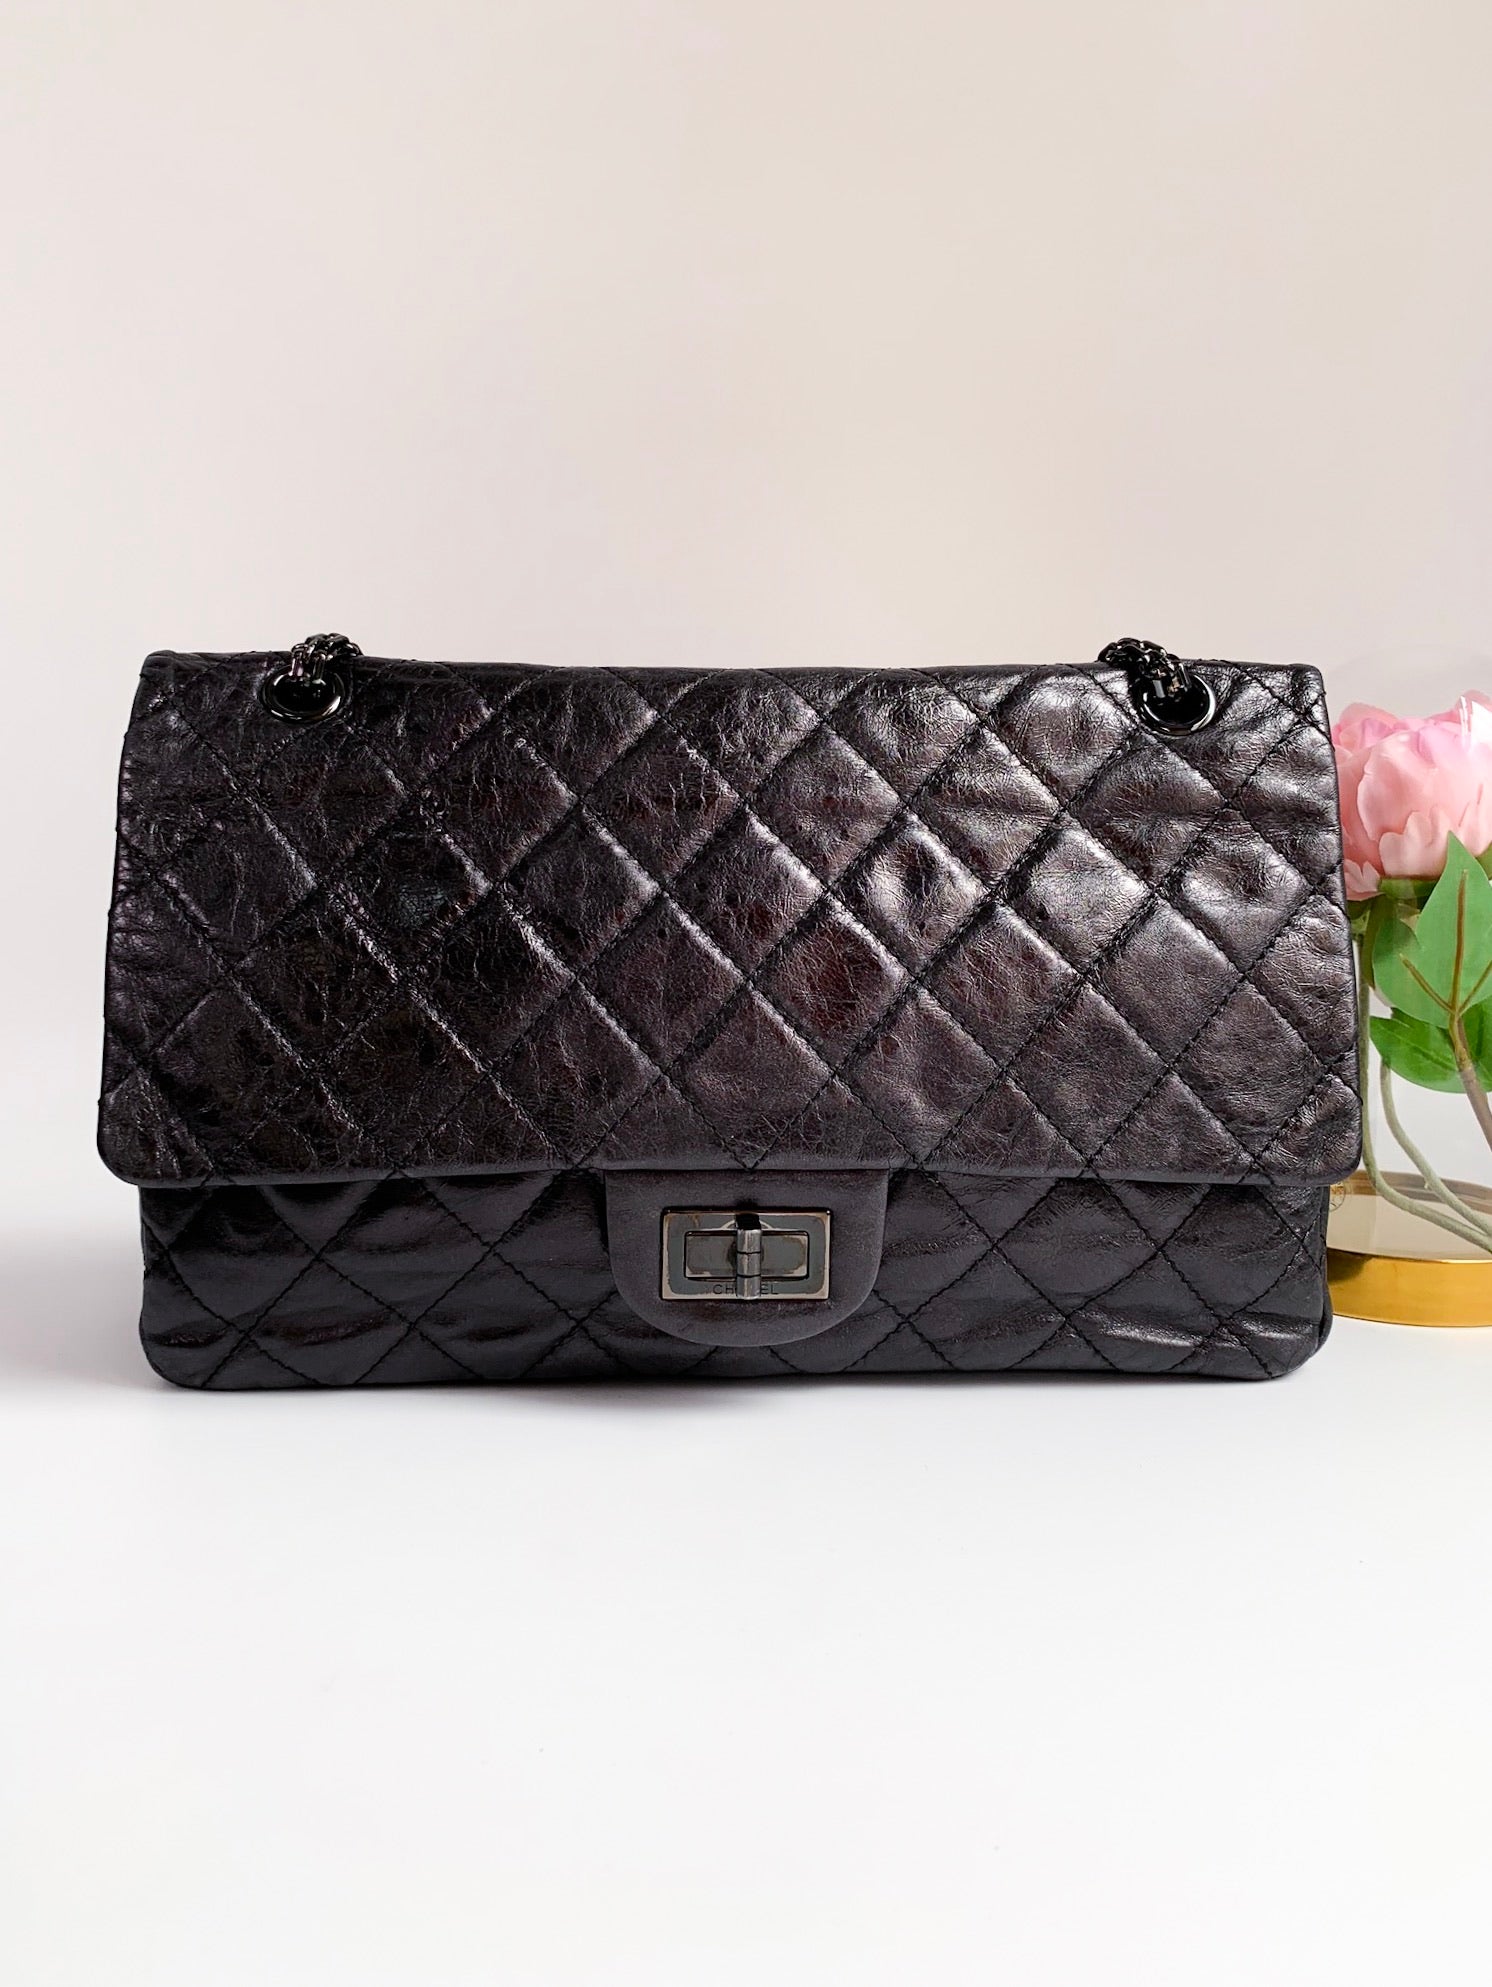 Chanel Glazed Calfskin Quilted 2.55 Reissue 227 Flap So Black